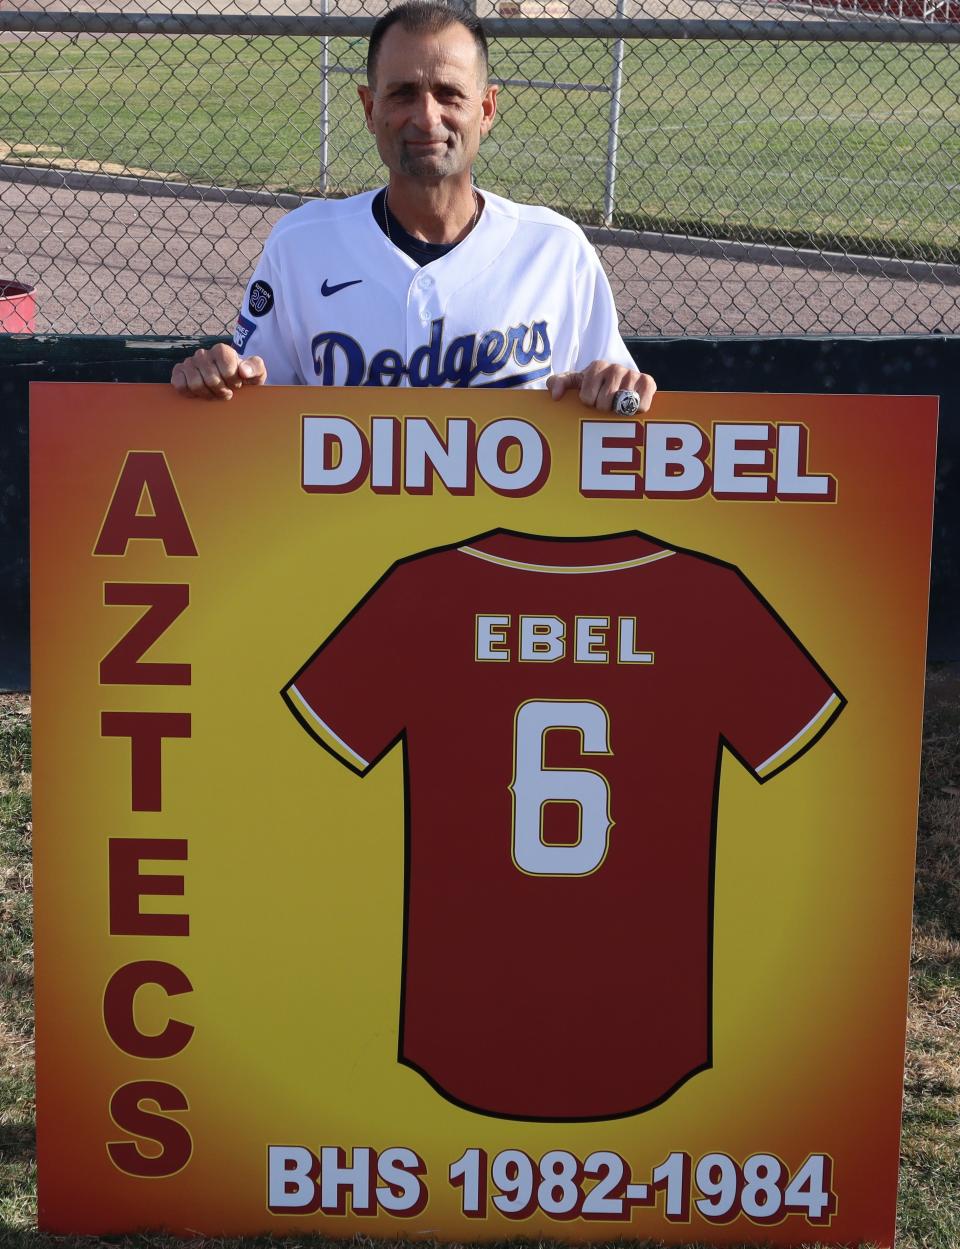 Los Angeles Dodgers third base coach Dino Ebel visited Barstow High School on Jan. 14, 2021 for a ceremony retiring the No. 6 jersey he wore while playing at the school.